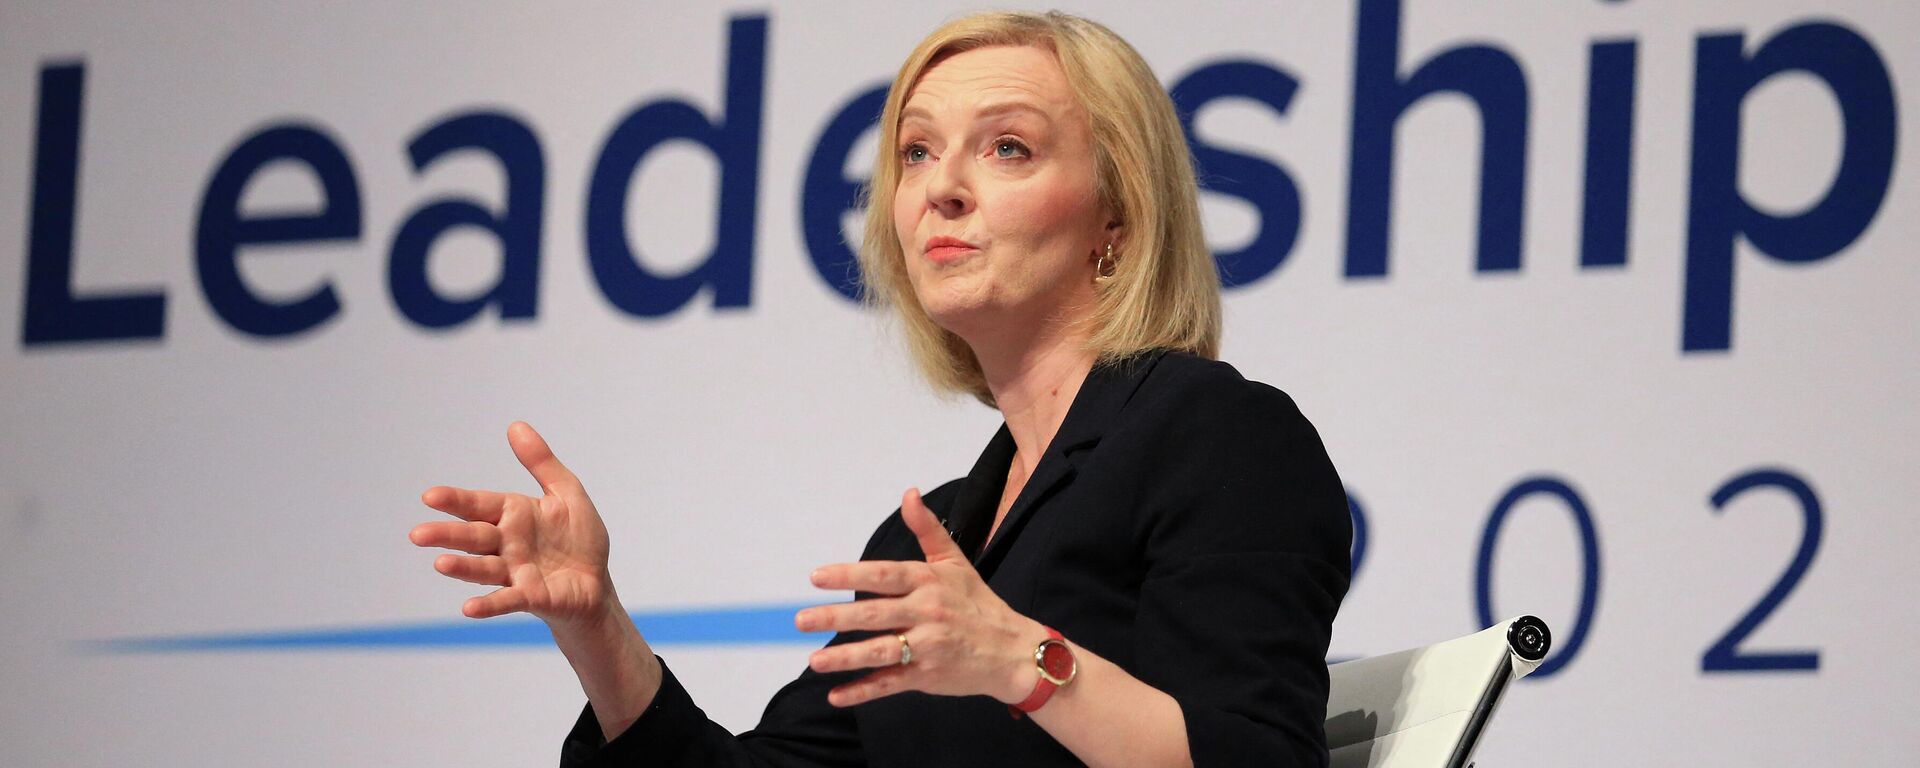 Britain's Foreign Secretary Liz Truss, a contender to become the country's next Prime Minister and leader of the Conservative party, speaks during a Conservative Party hustings event in Darlington, north east England on August 9, 2022 - Sputnik International, 1920, 24.08.2022